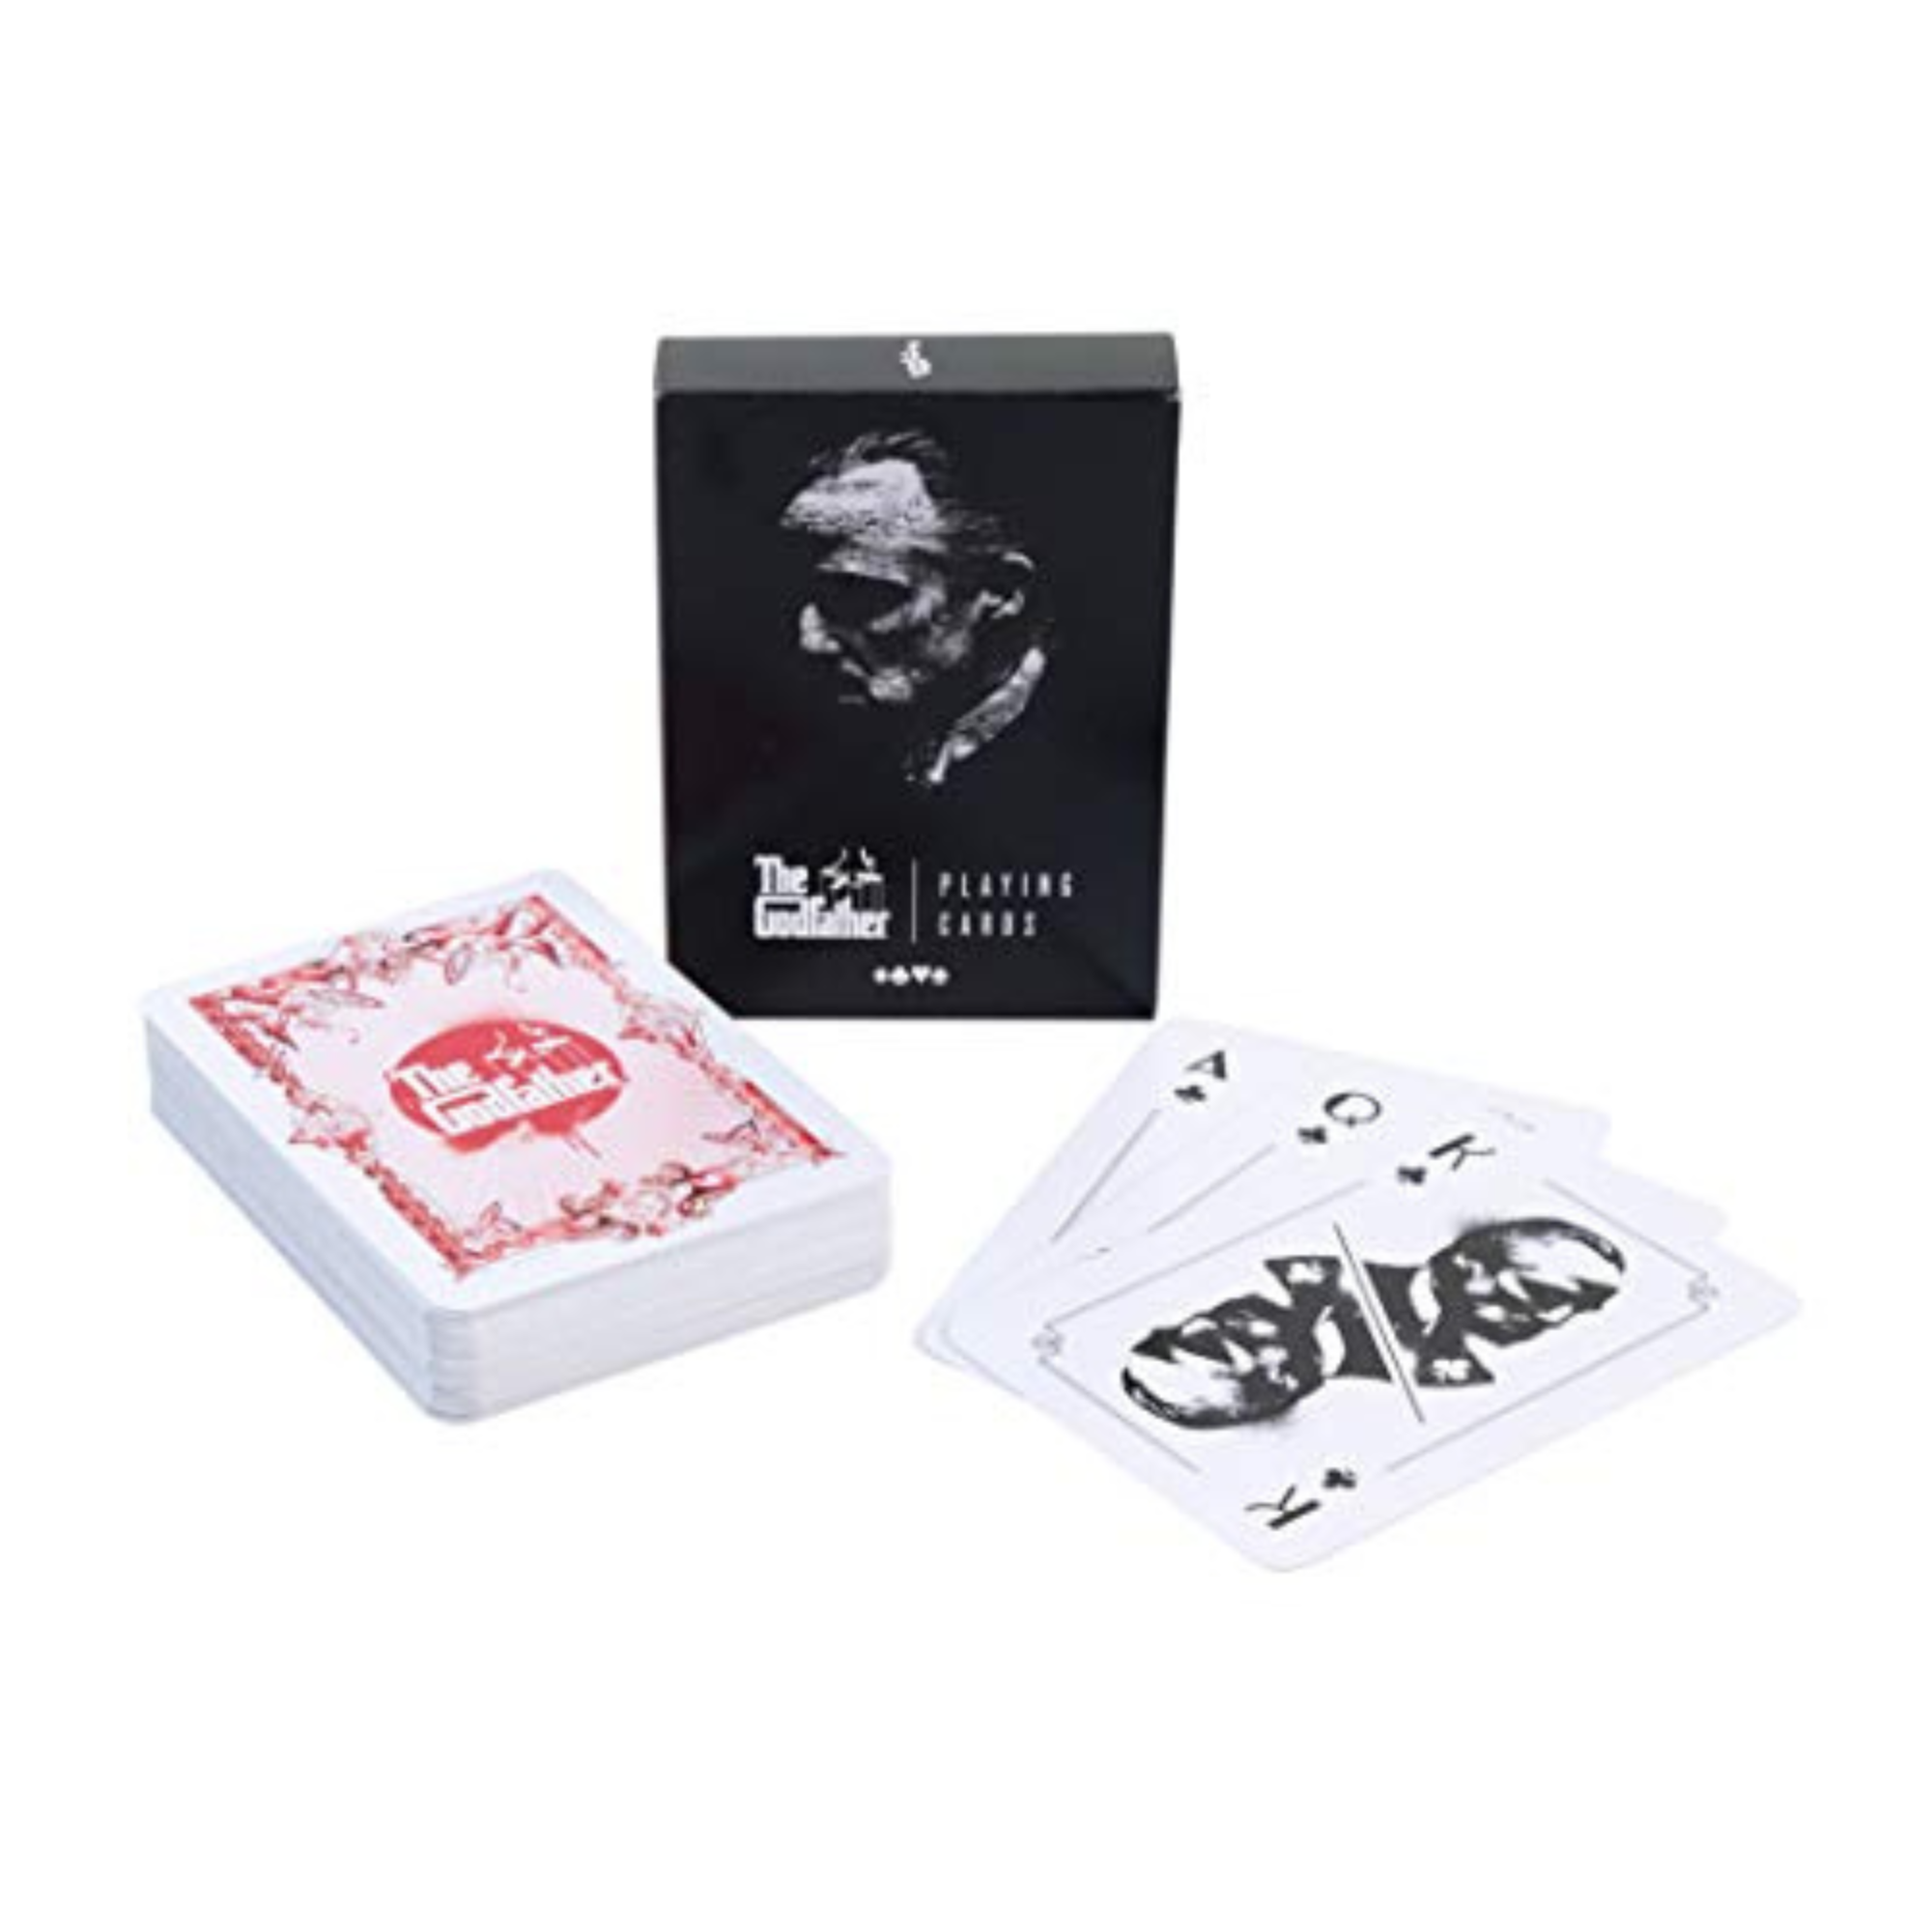 The Godfather 52 Card Deck Playing Cards - Toptoys2u